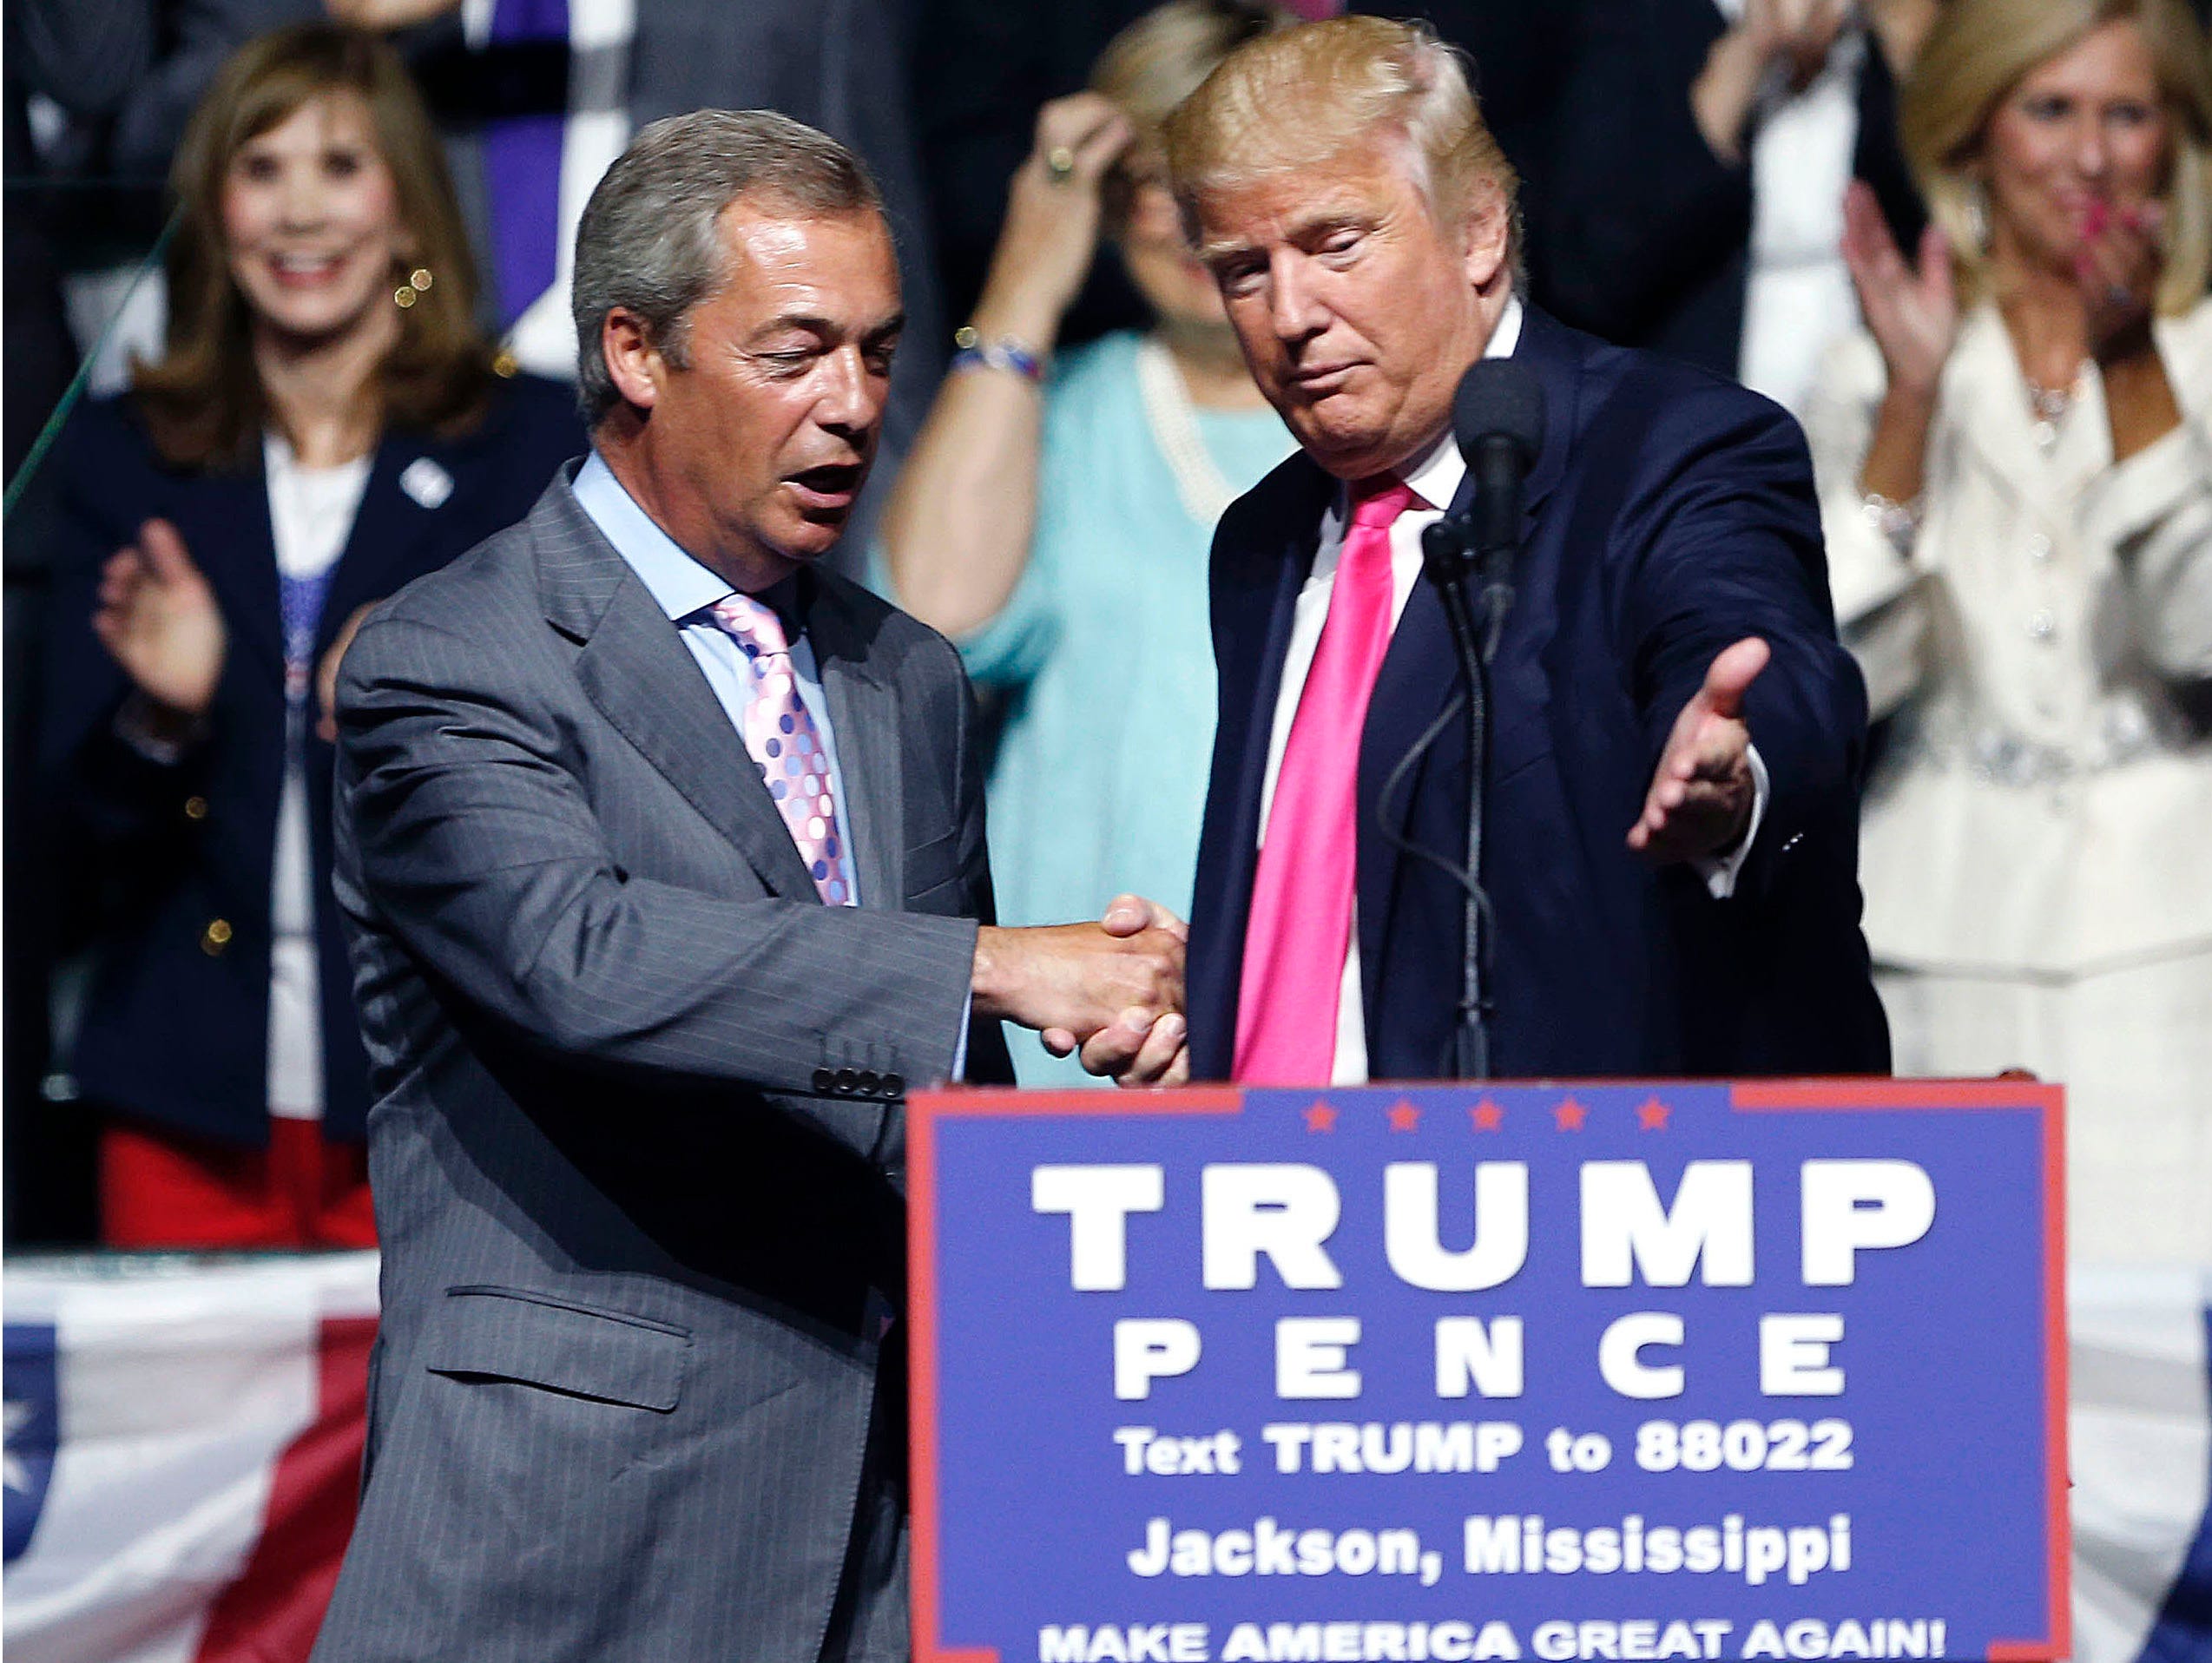 In this Wednesday, Aug. 24, 2016, file photo, then-Republican presidential candidate Donald Trump, right, welcomes pro-Brexit British politician Nigel Farage, to speak at a campaign rally in Jackson, Miss.